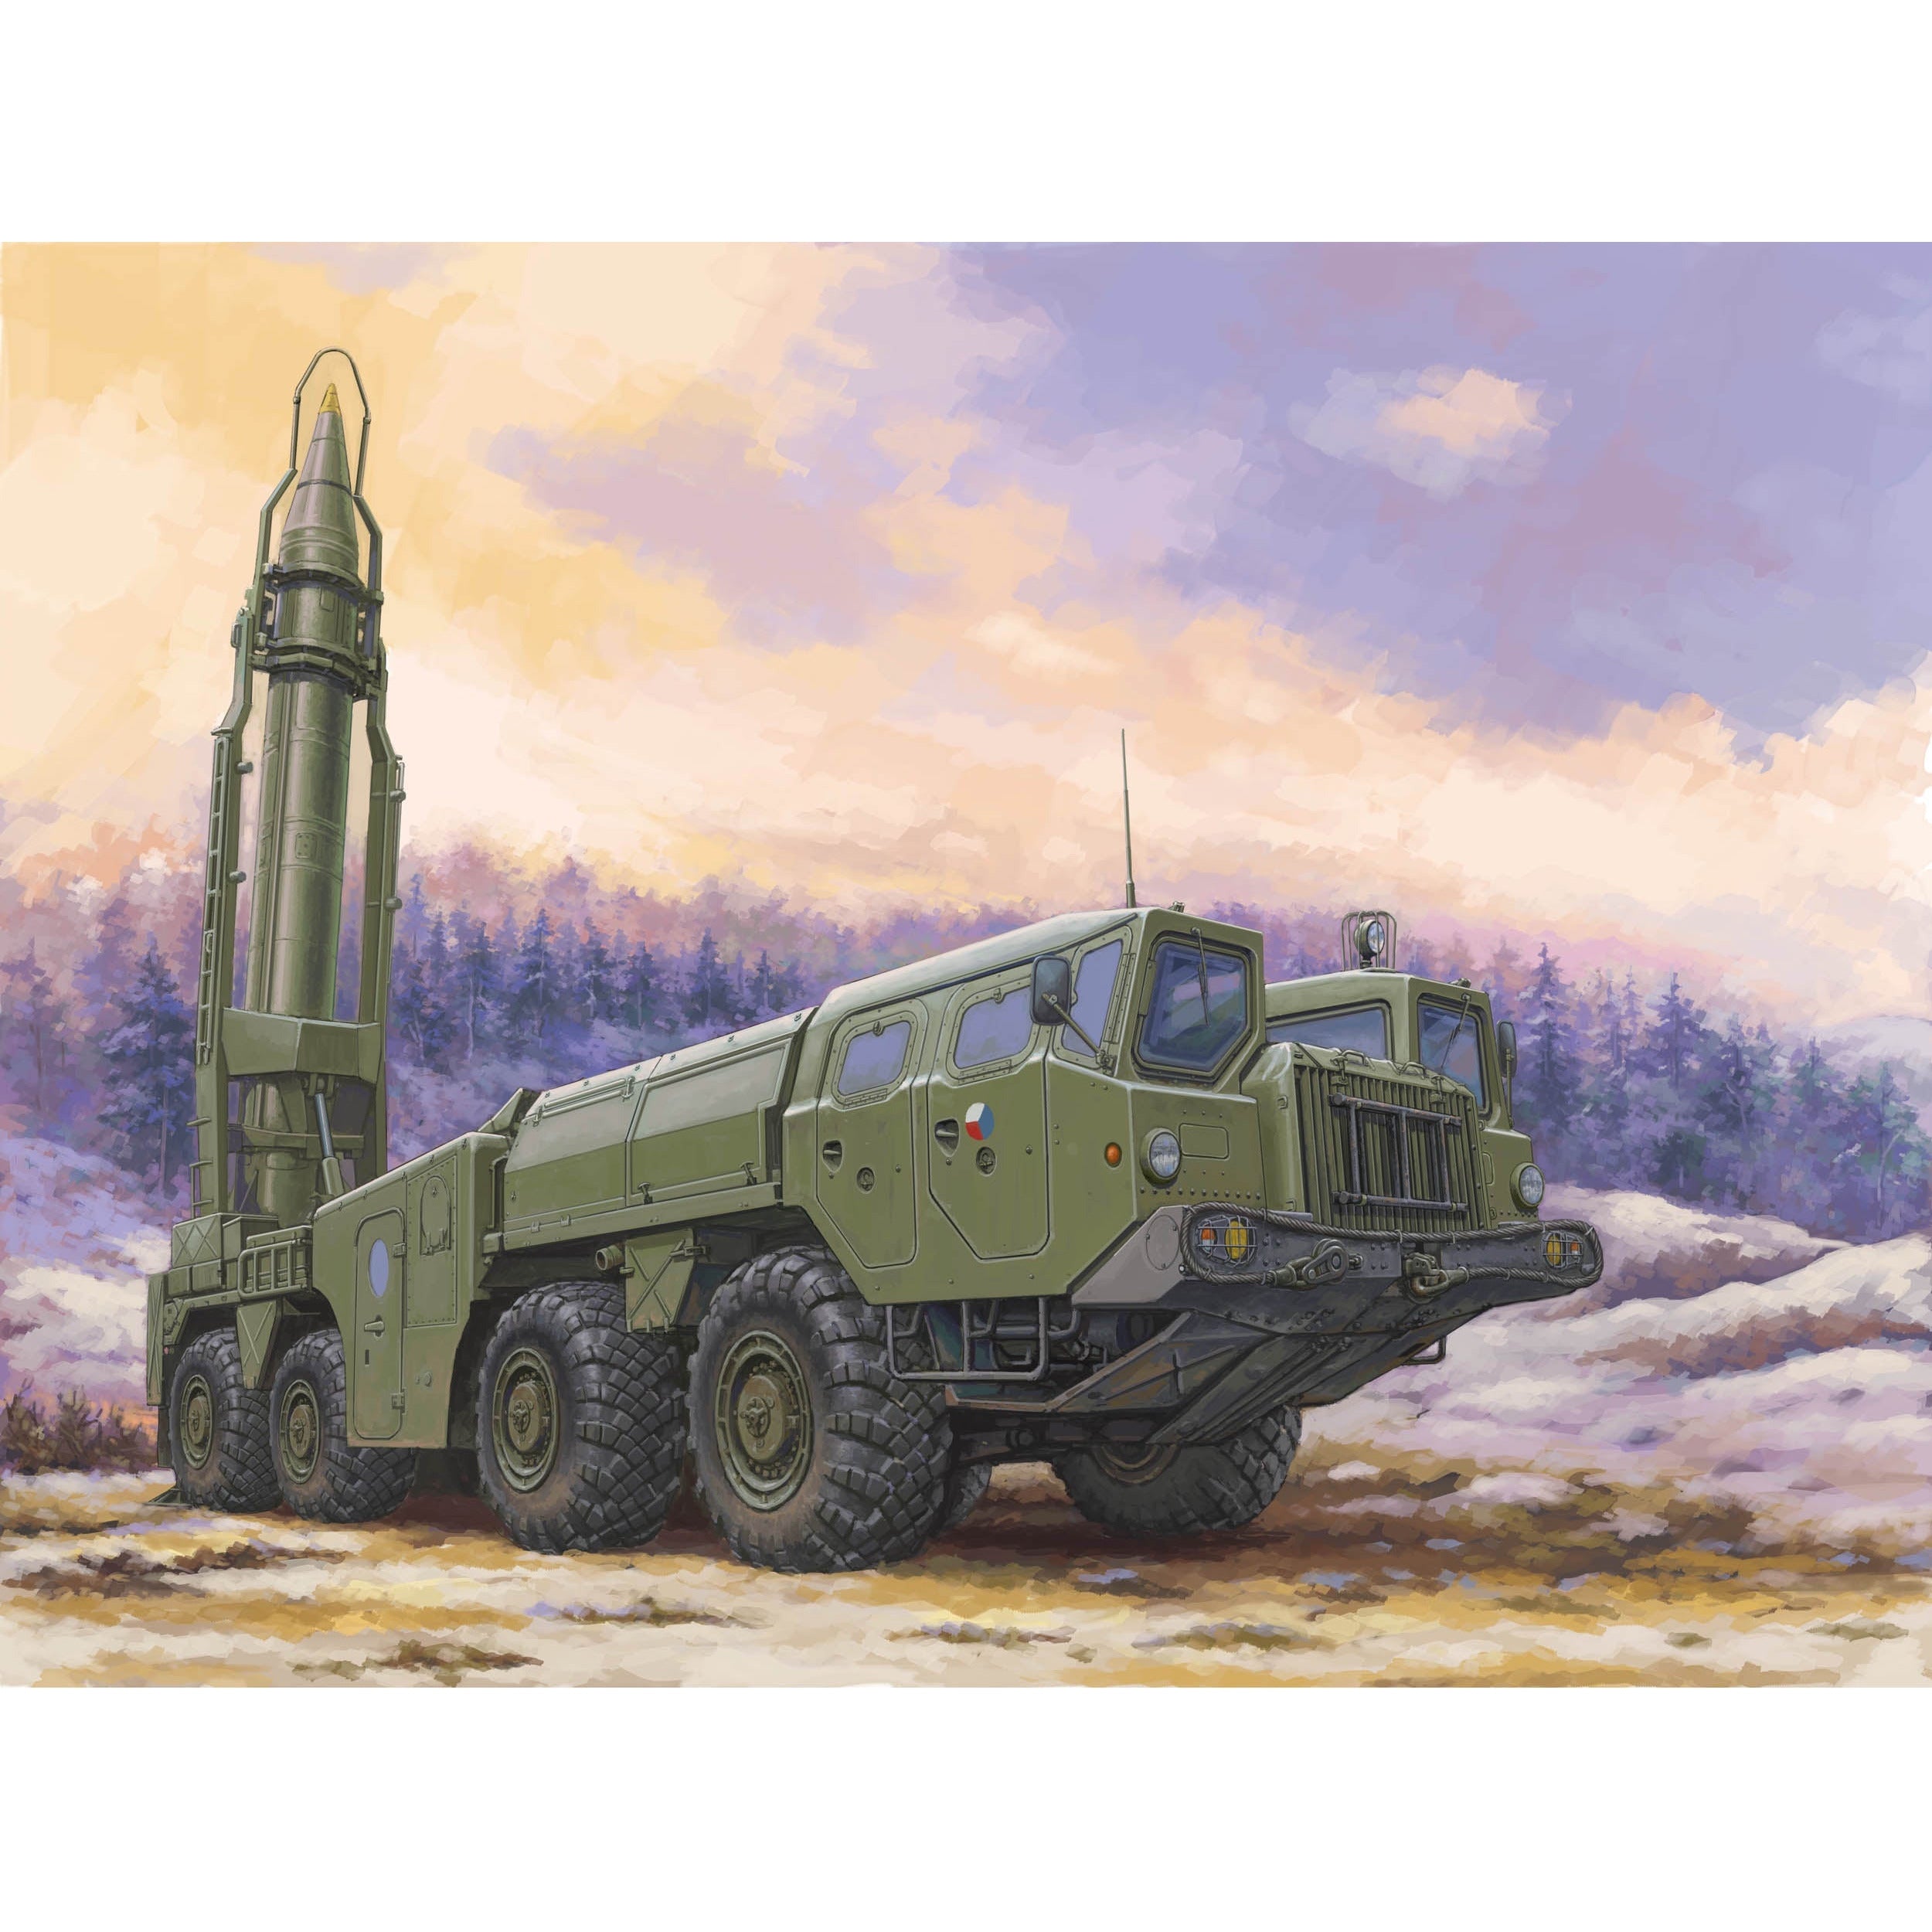 Soviet (9P117M1) Launcher with R17 Rocket of 9K72 Missile Complex "Elbrus"(Scud B) 1/72 #82939 by Hobby Boss